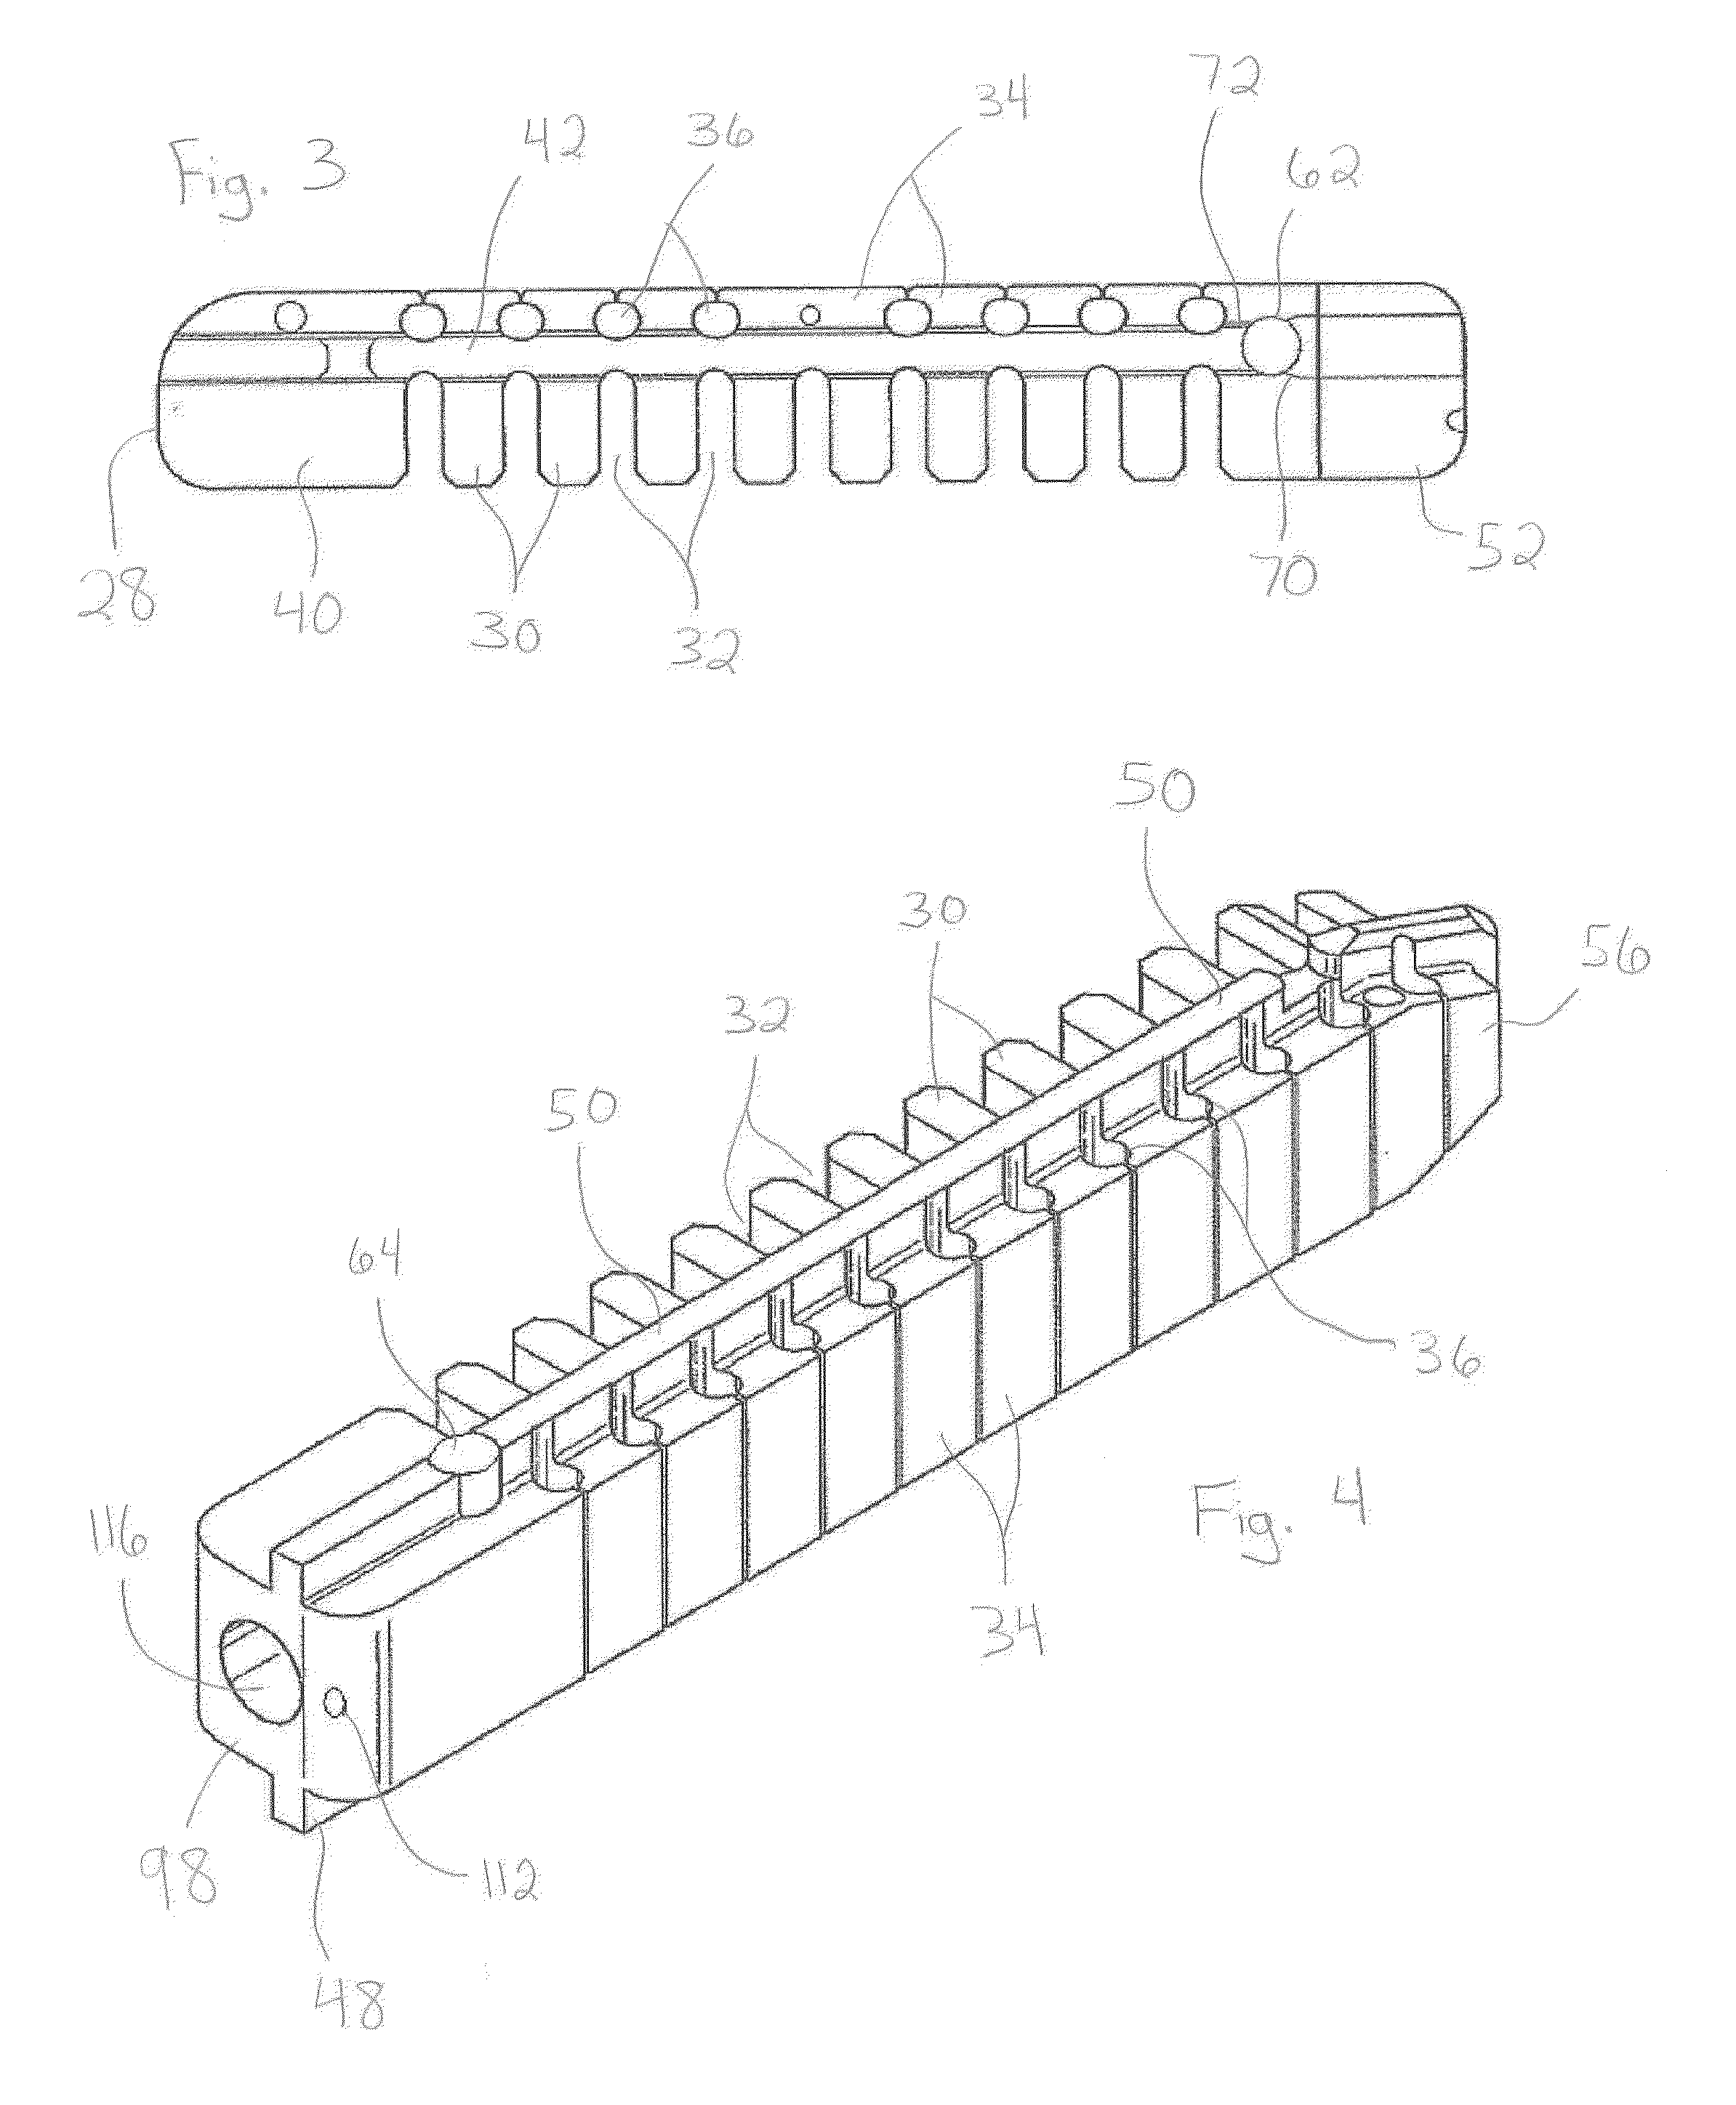 Spinal fusion implants and devices and methods for deploying such implants